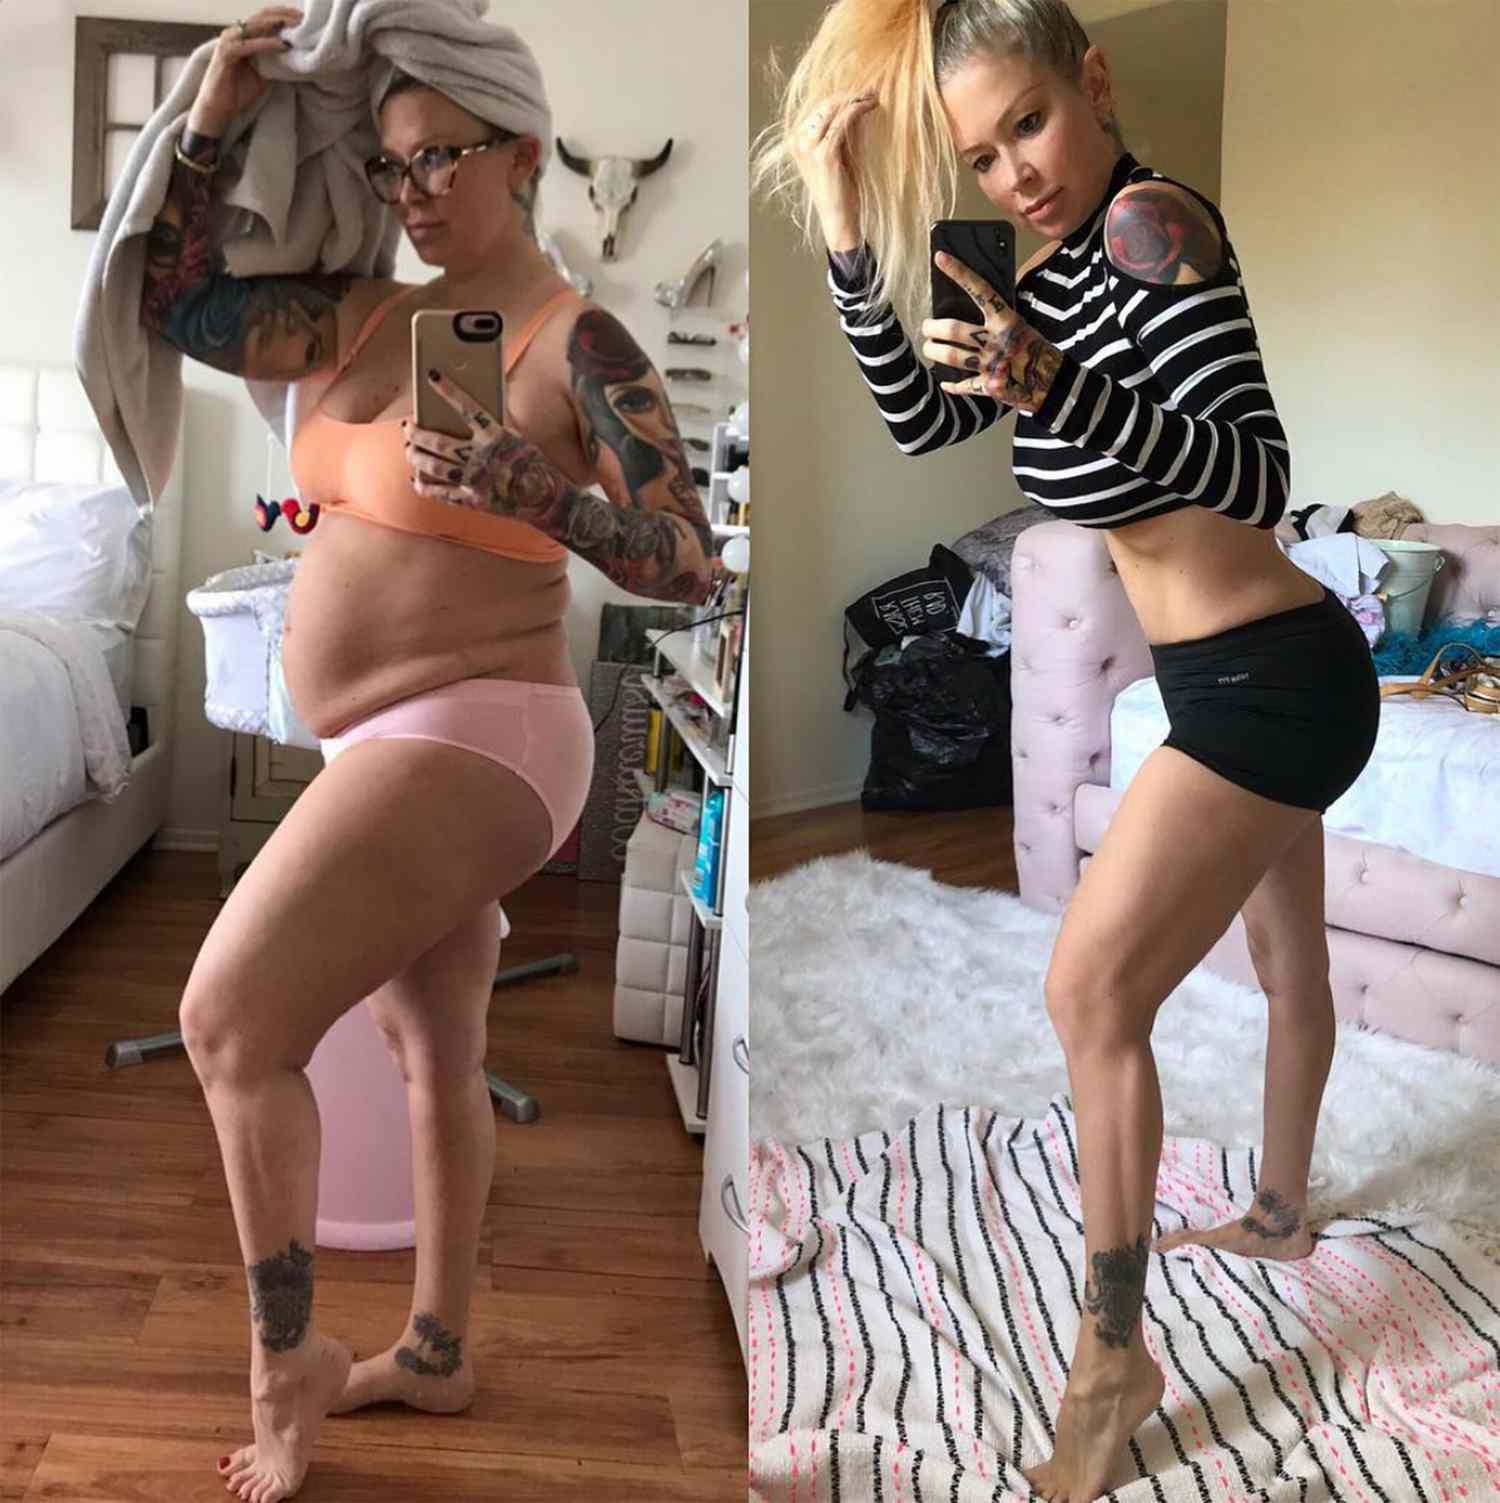 Jenna Jameson Shares Before and After Postpartum Photos | PEOPLE.com